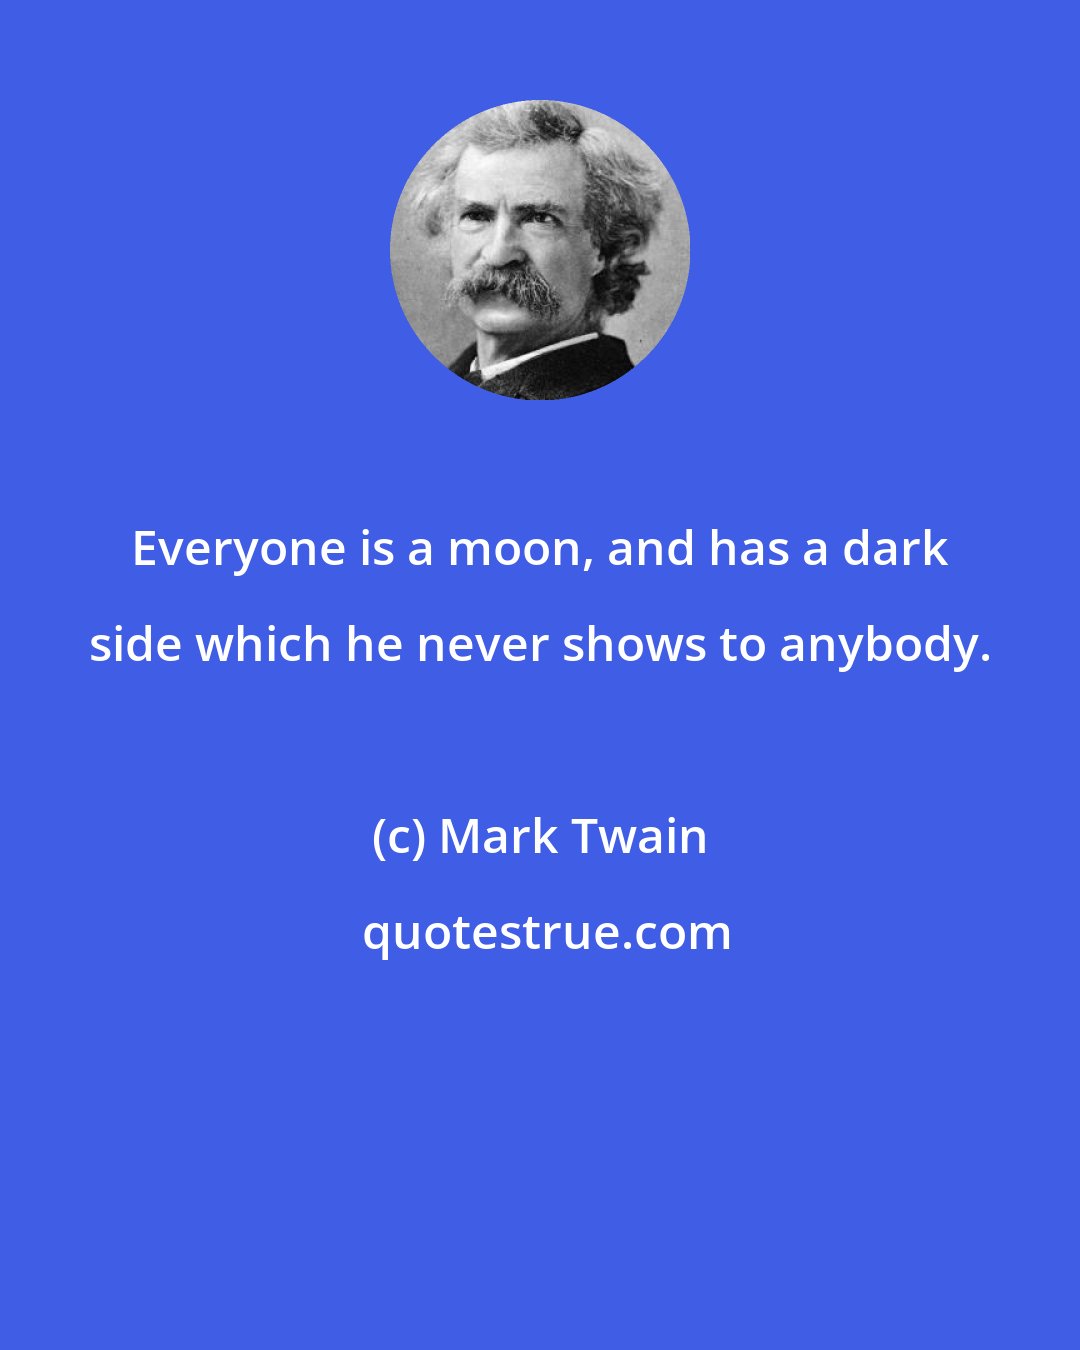 Mark Twain: Everyone is a moon, and has a dark side which he never shows to anybody.